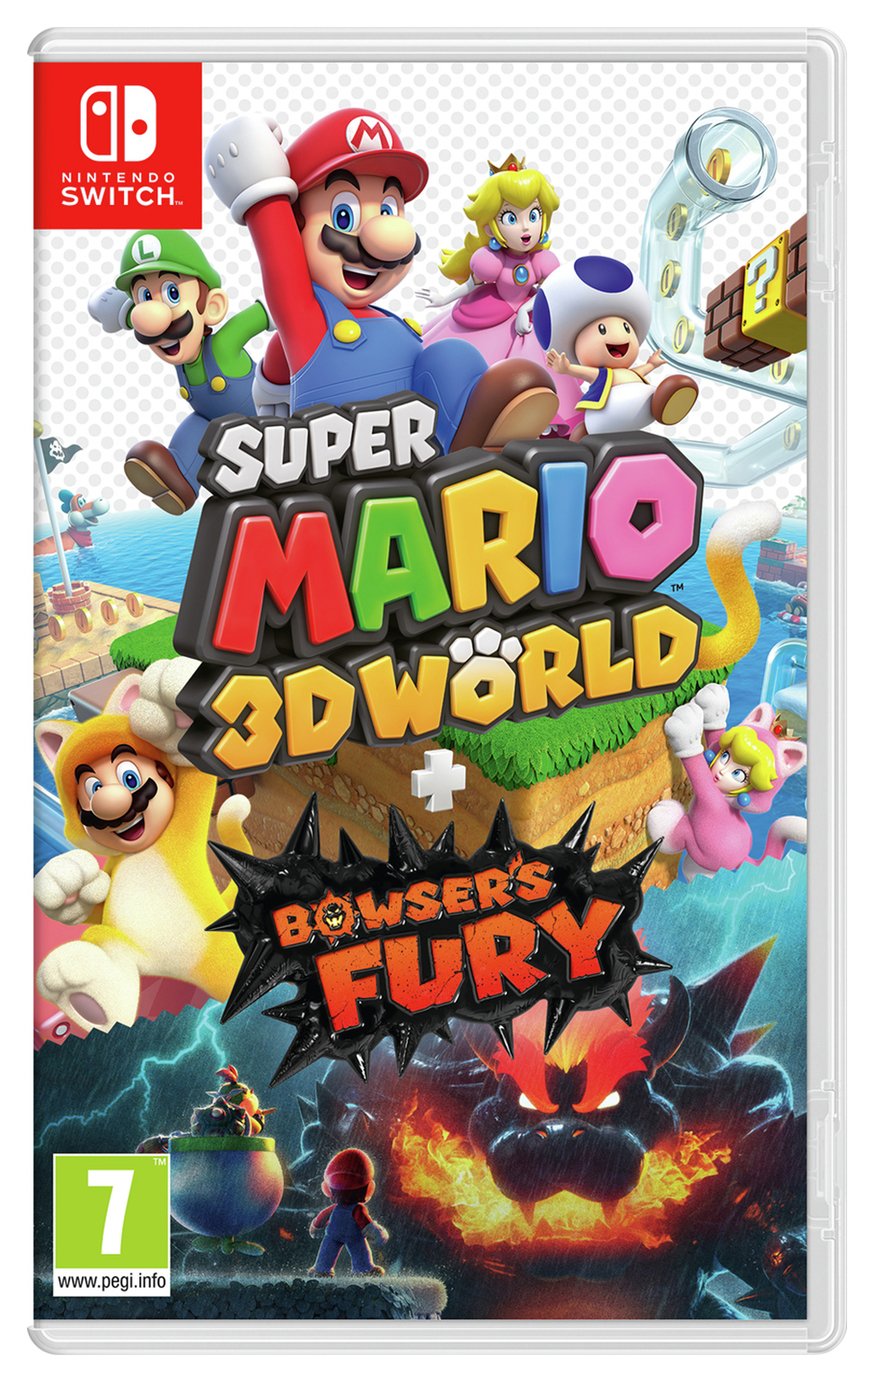 Super Mario 3D World   Bowser's Fury Nintendo Switch Game